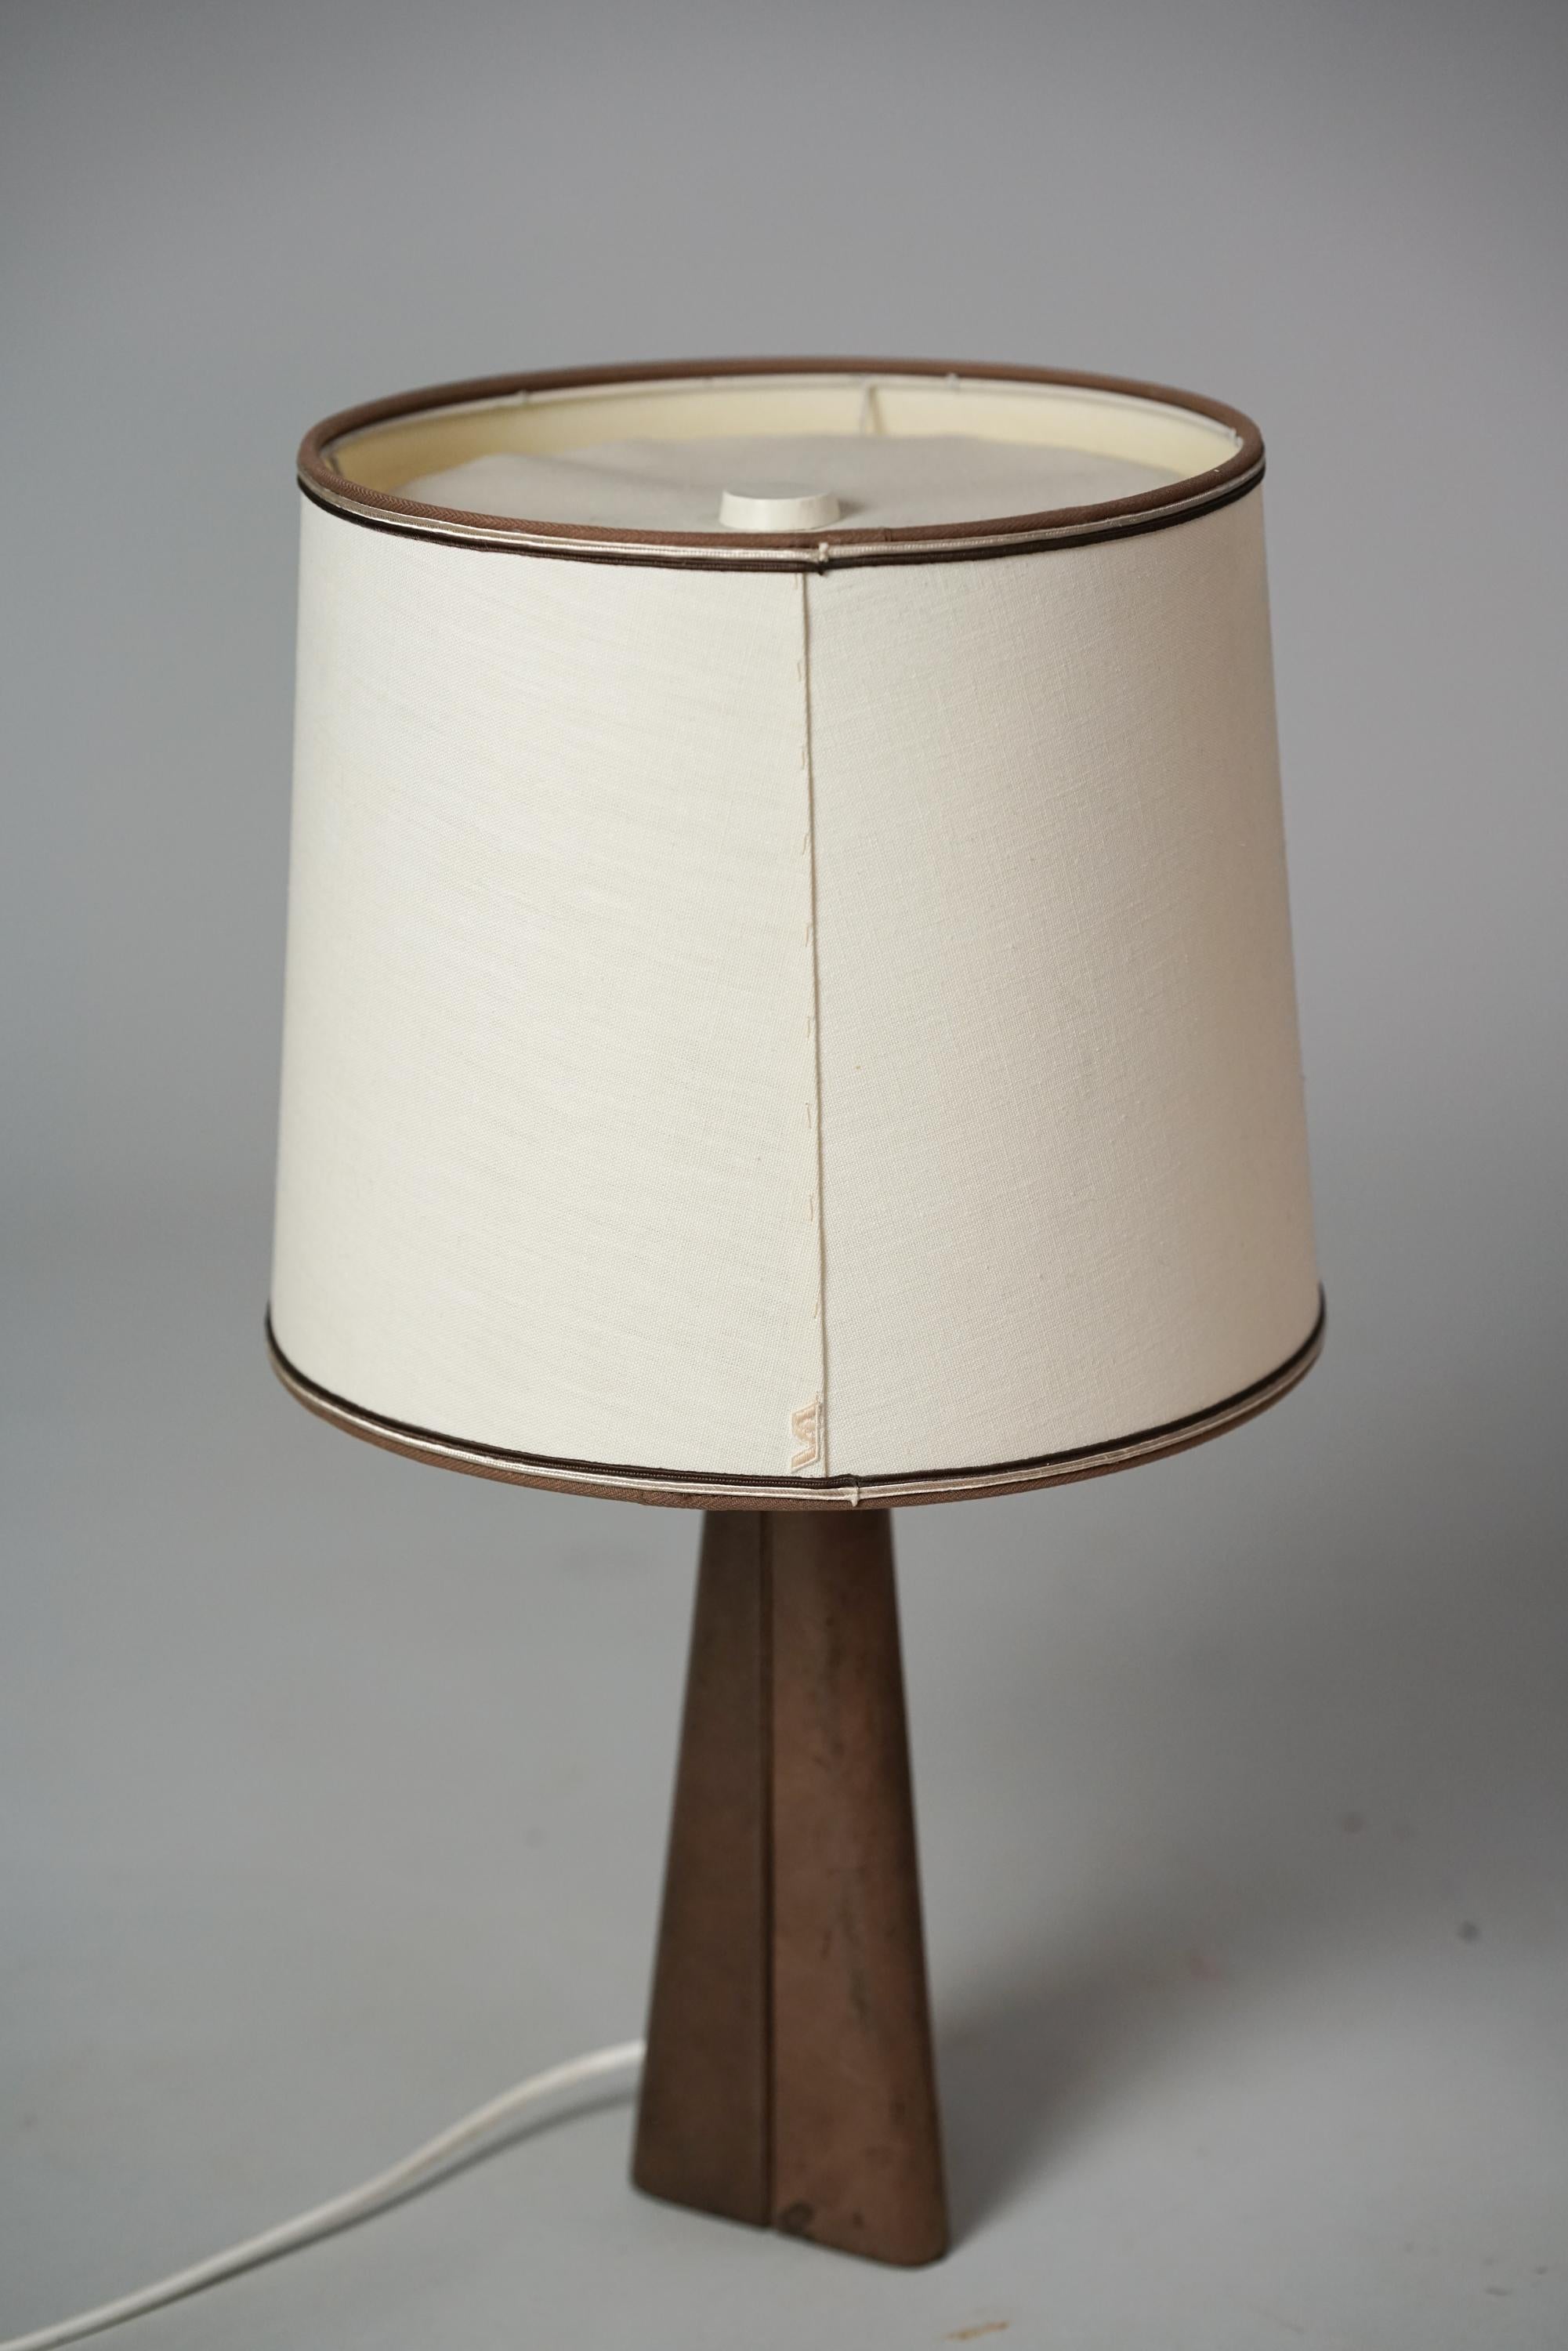 Mid-20th Century Leather Table Lamp, Lisa Johansson-Pape, Orno Oy, 1950s For Sale